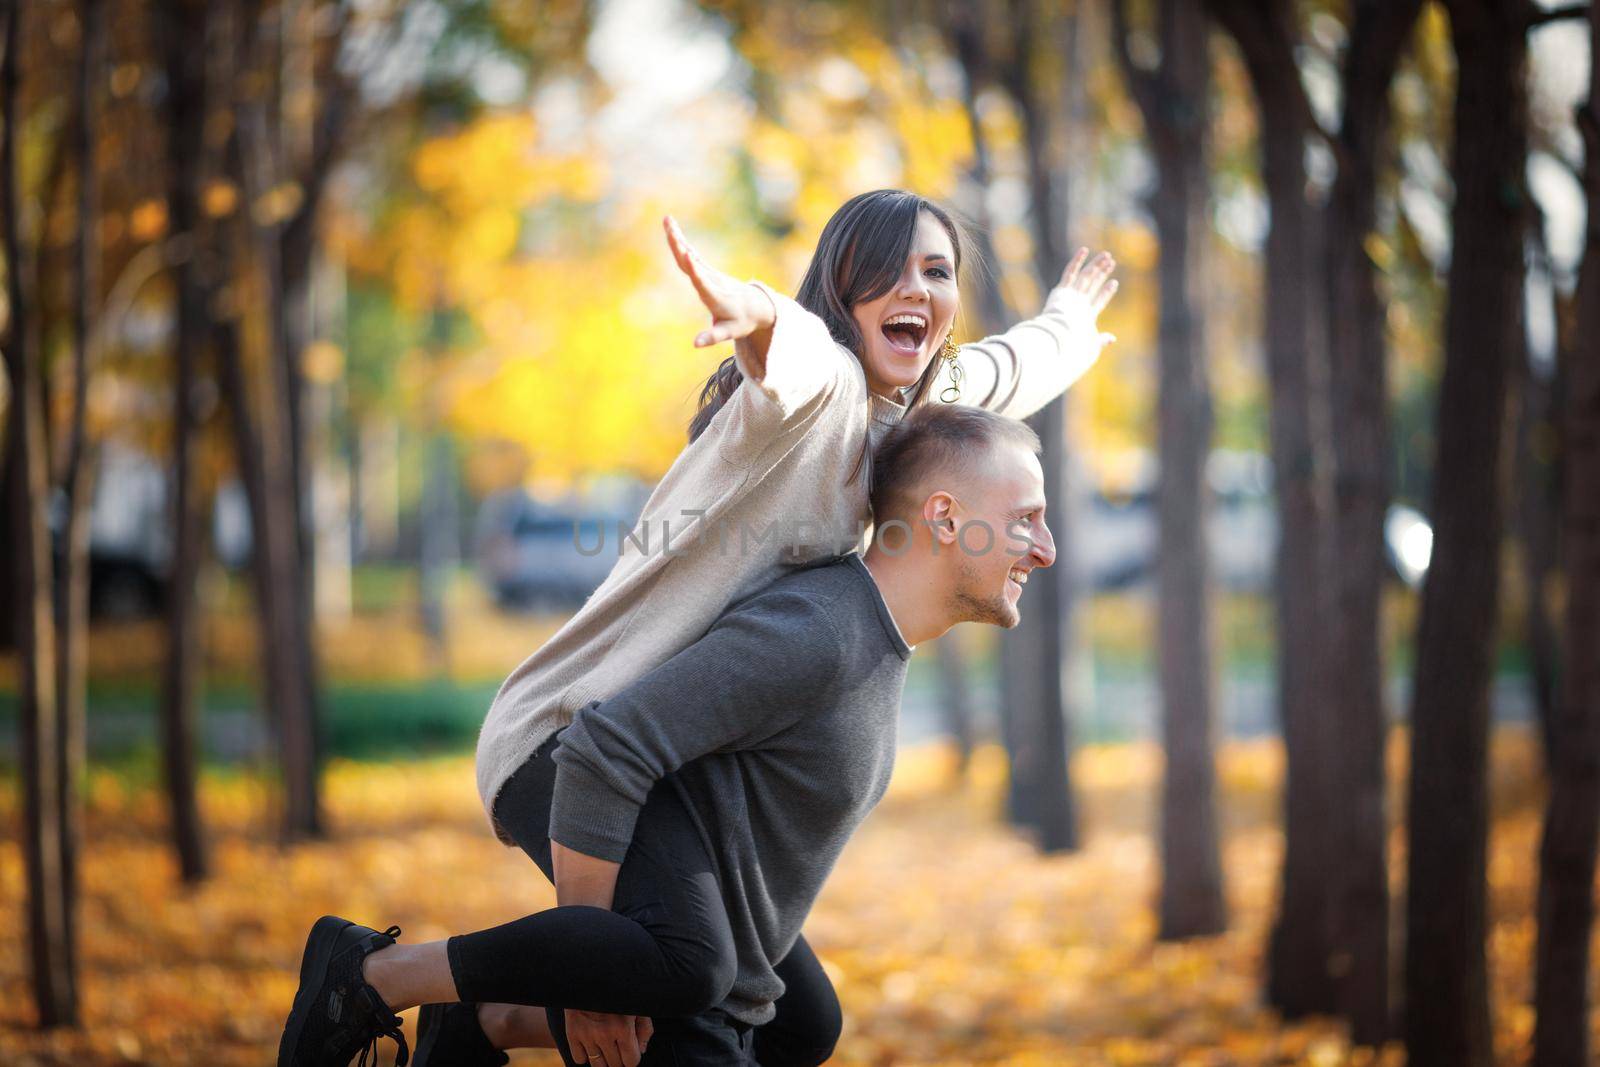 Happy smiling man carrying his laughing girlfriend on back in autumn nature.